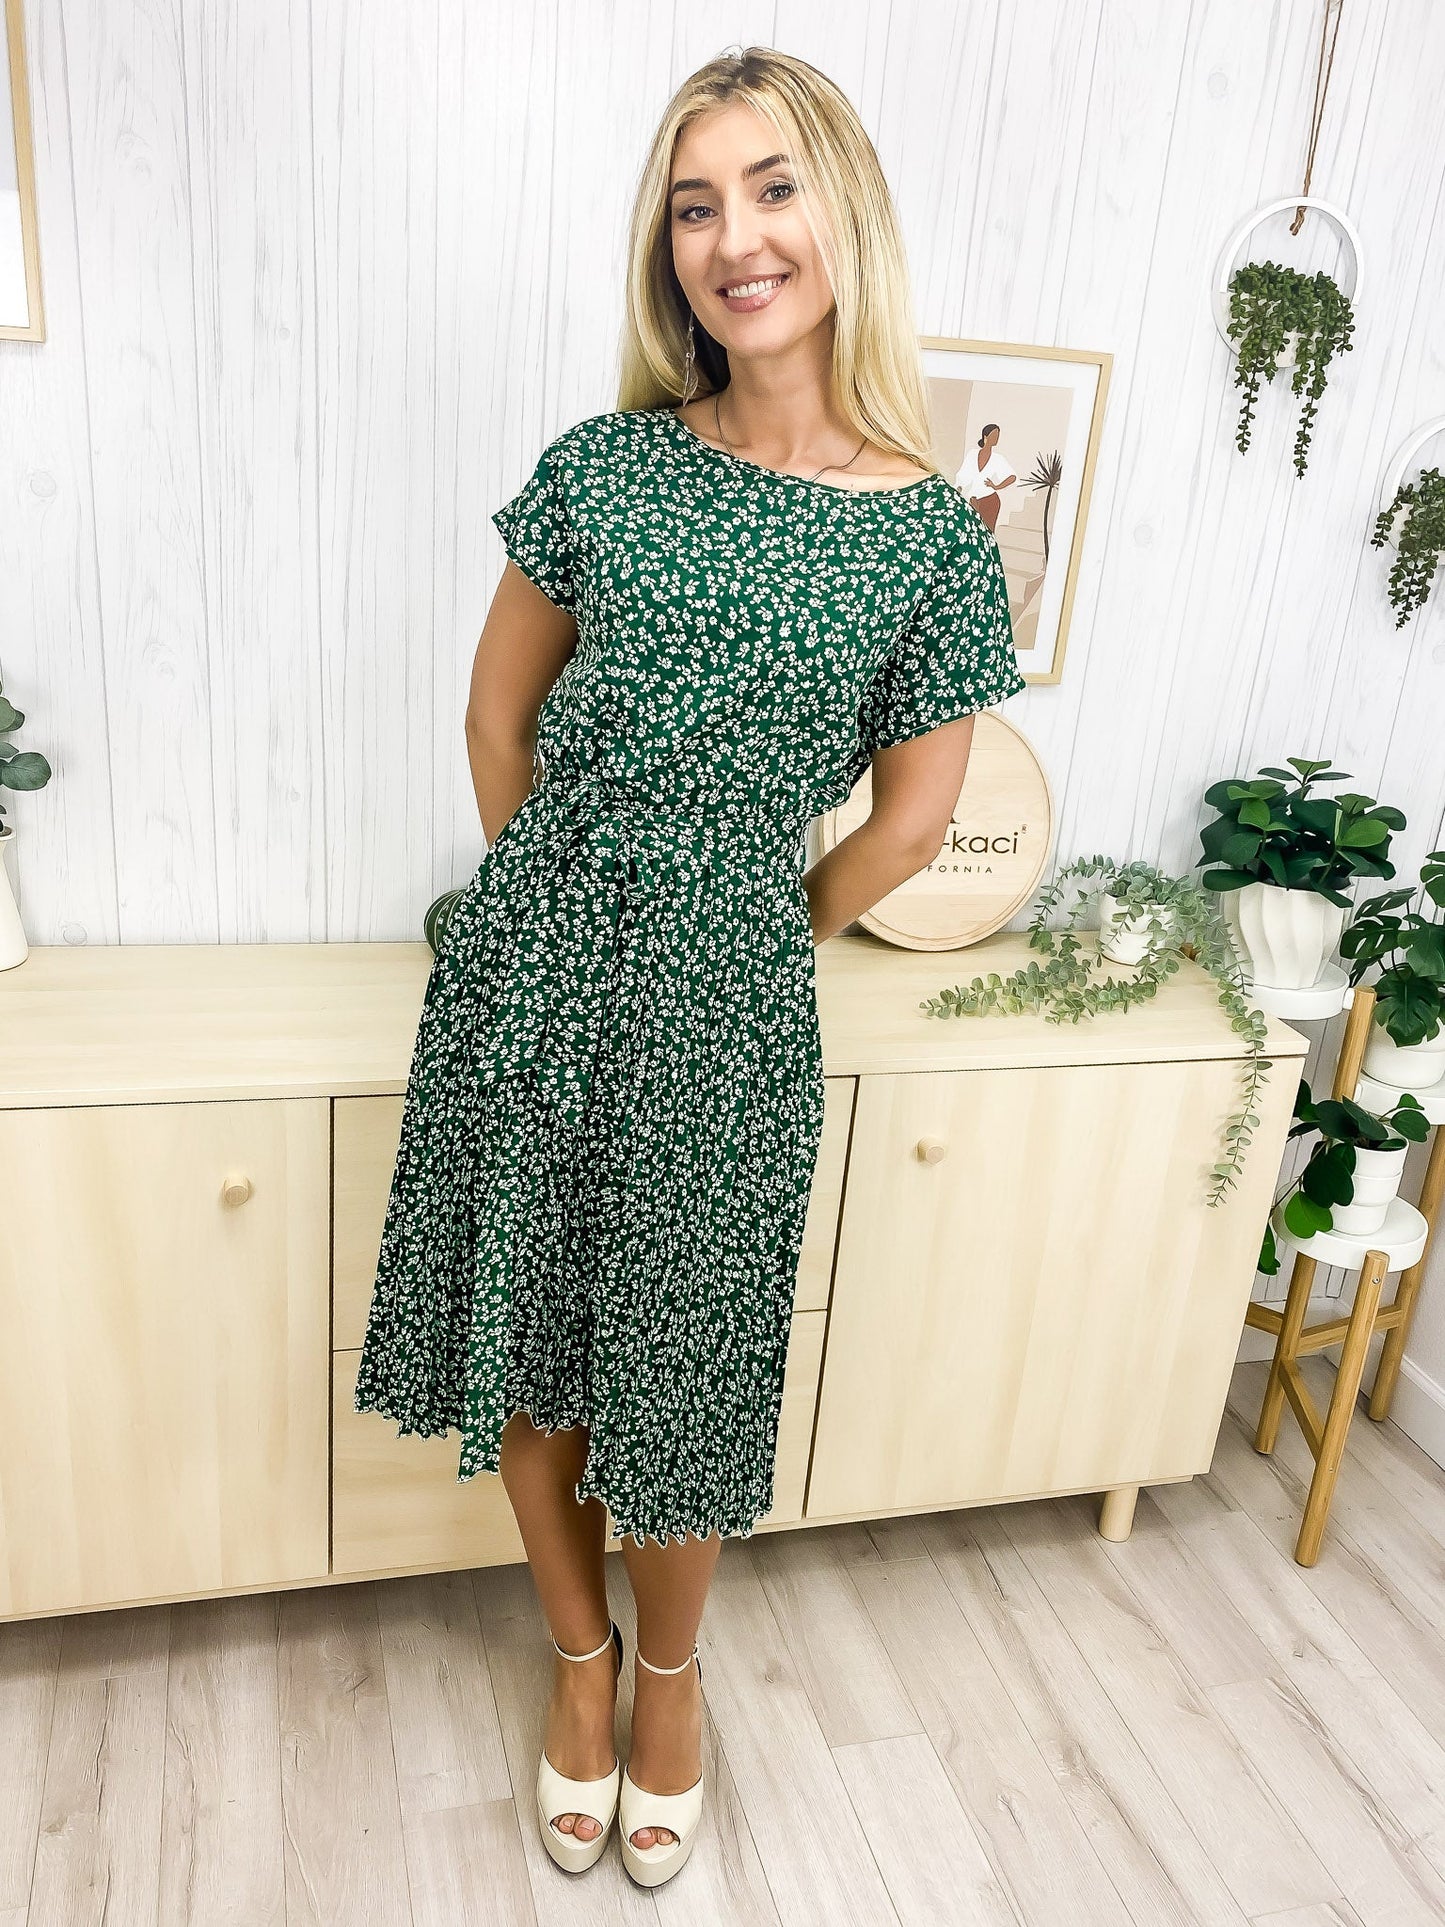 Ditsy Floral Print Pleated Dress